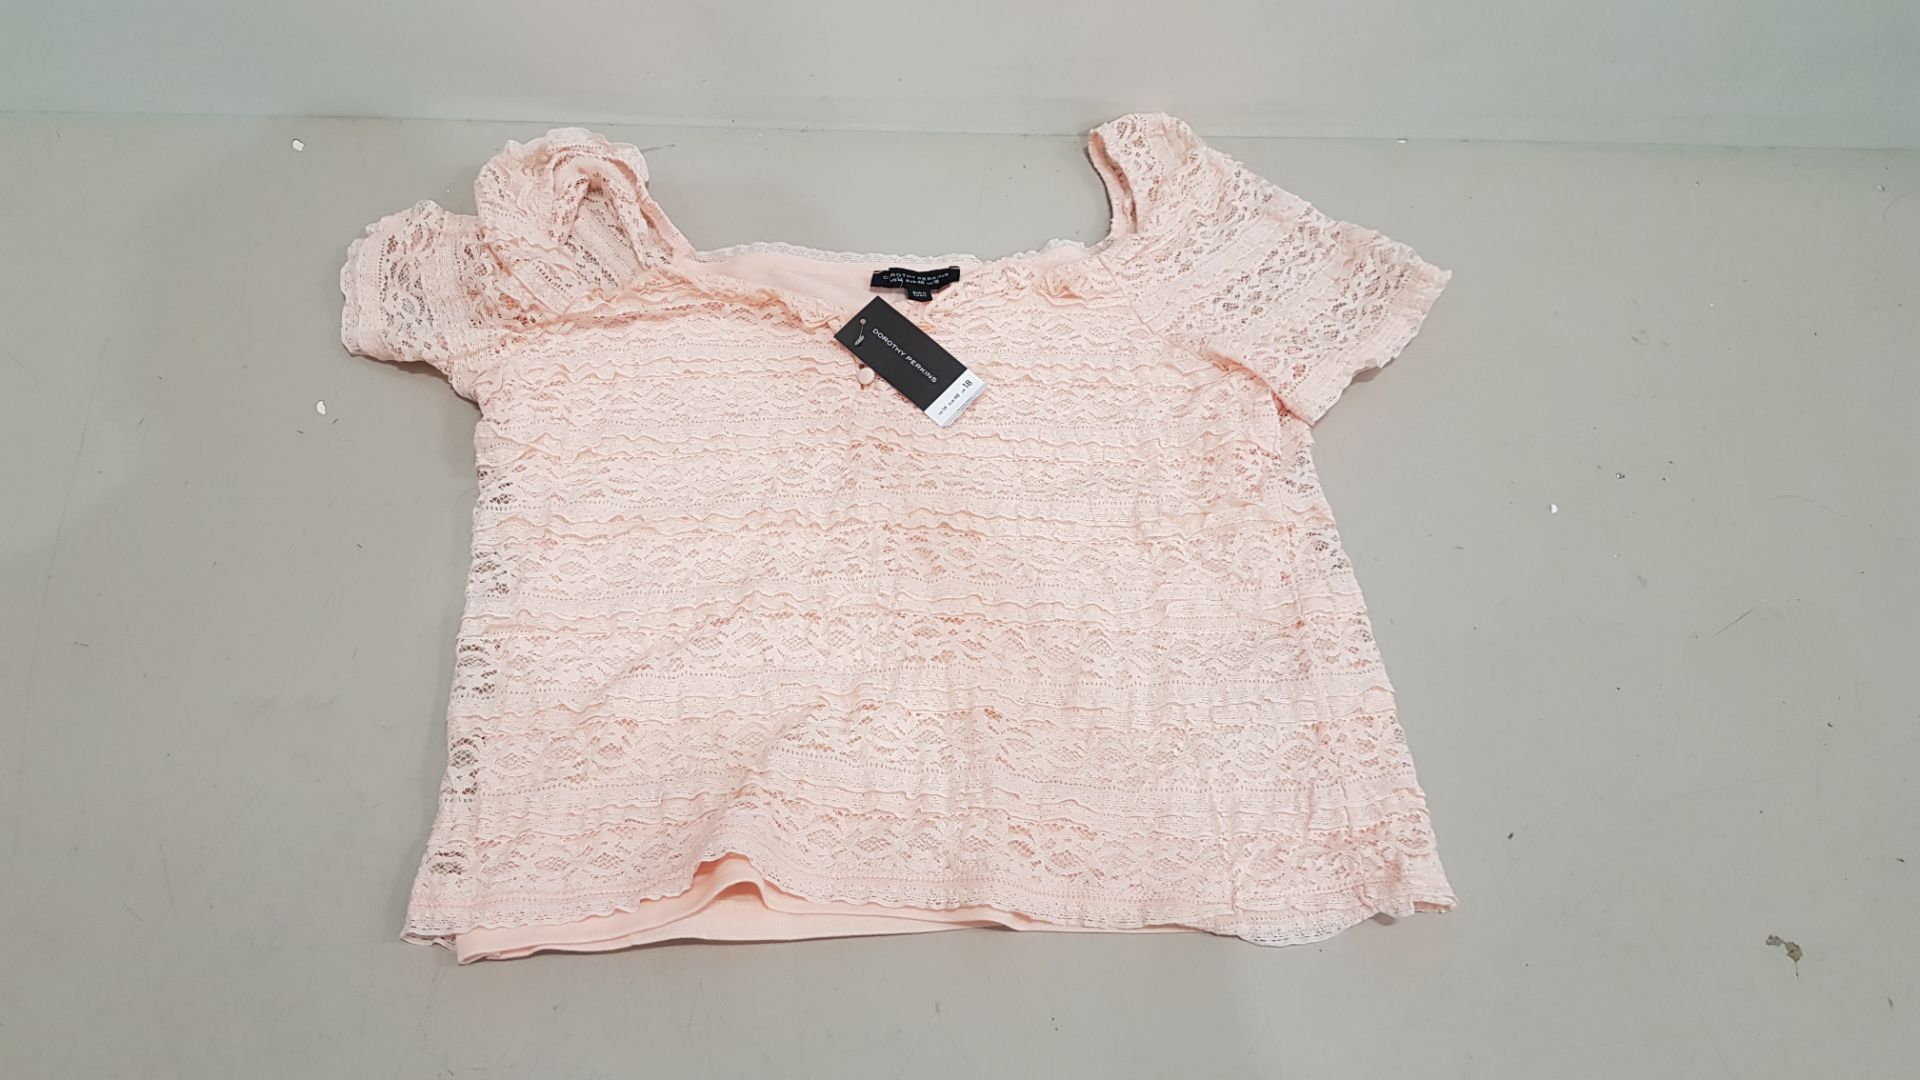 25 X BRAND NEW DOROTHY PERKINS WOMANS CROP TOPS IN LIGHT PINK COLOUR - ALL IN VARIOUS SIZES TO